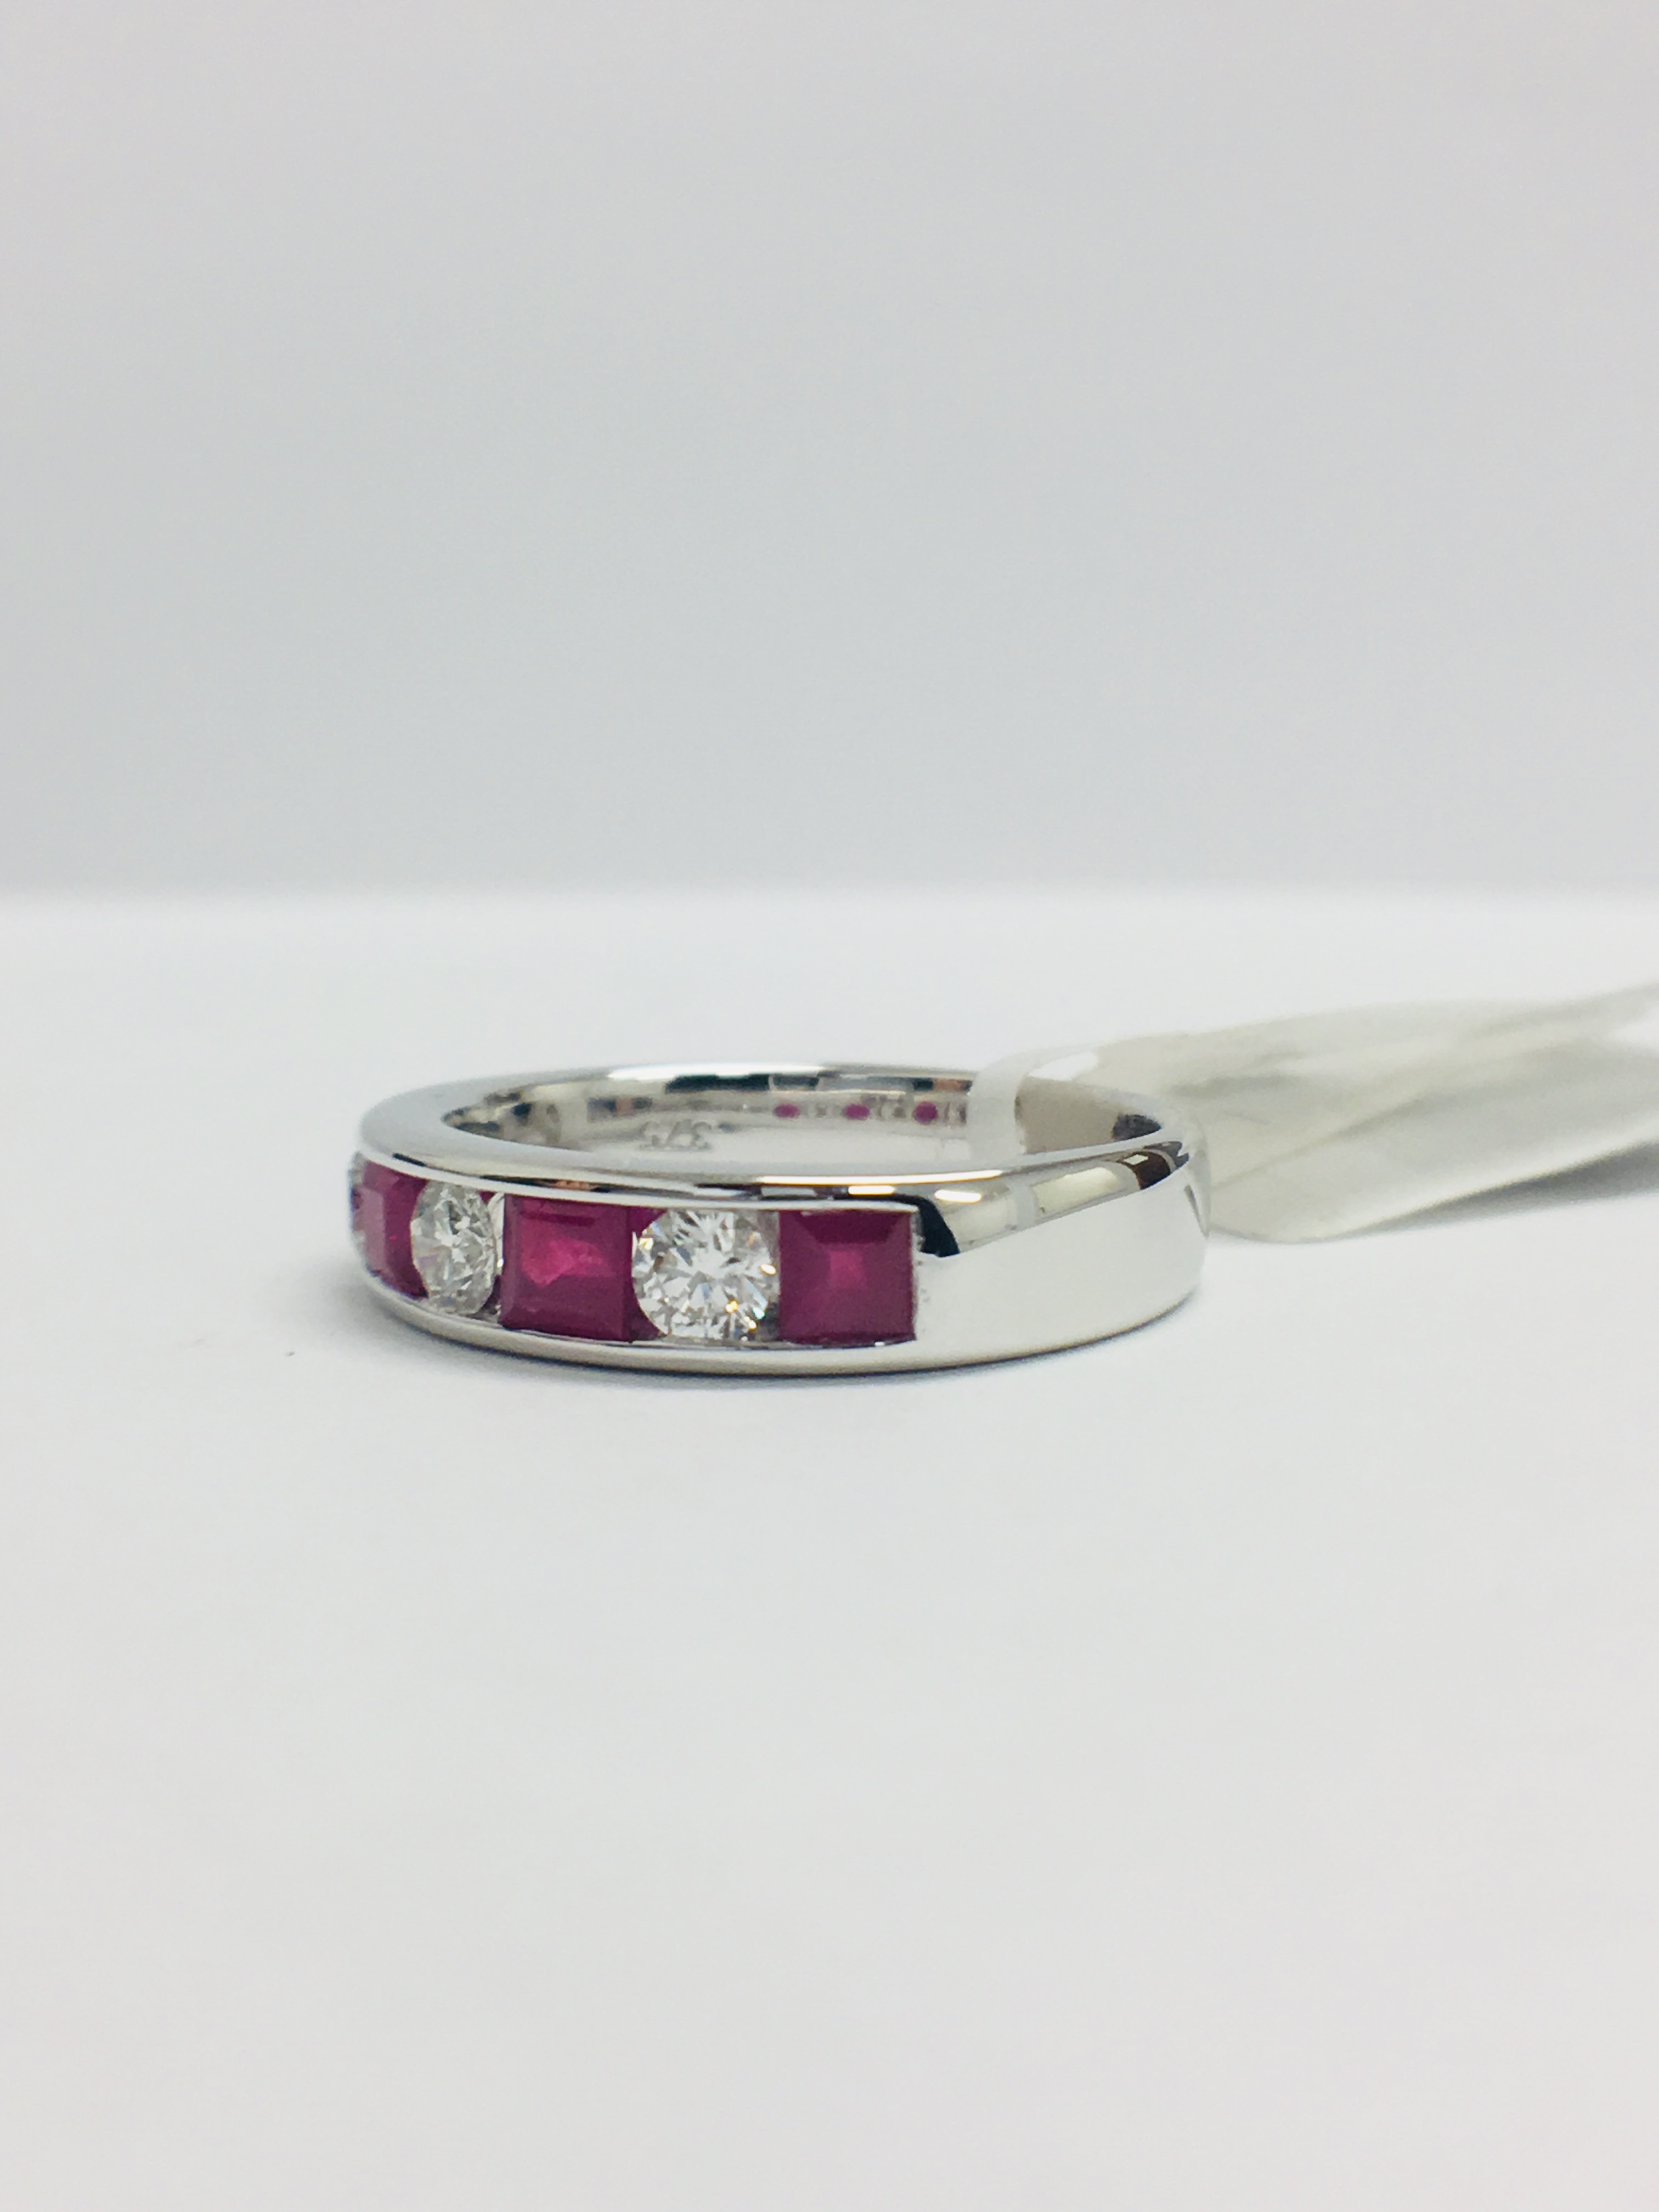 9Ct White Gold Ruby Diamond Channel Set Ring, - Image 4 of 9